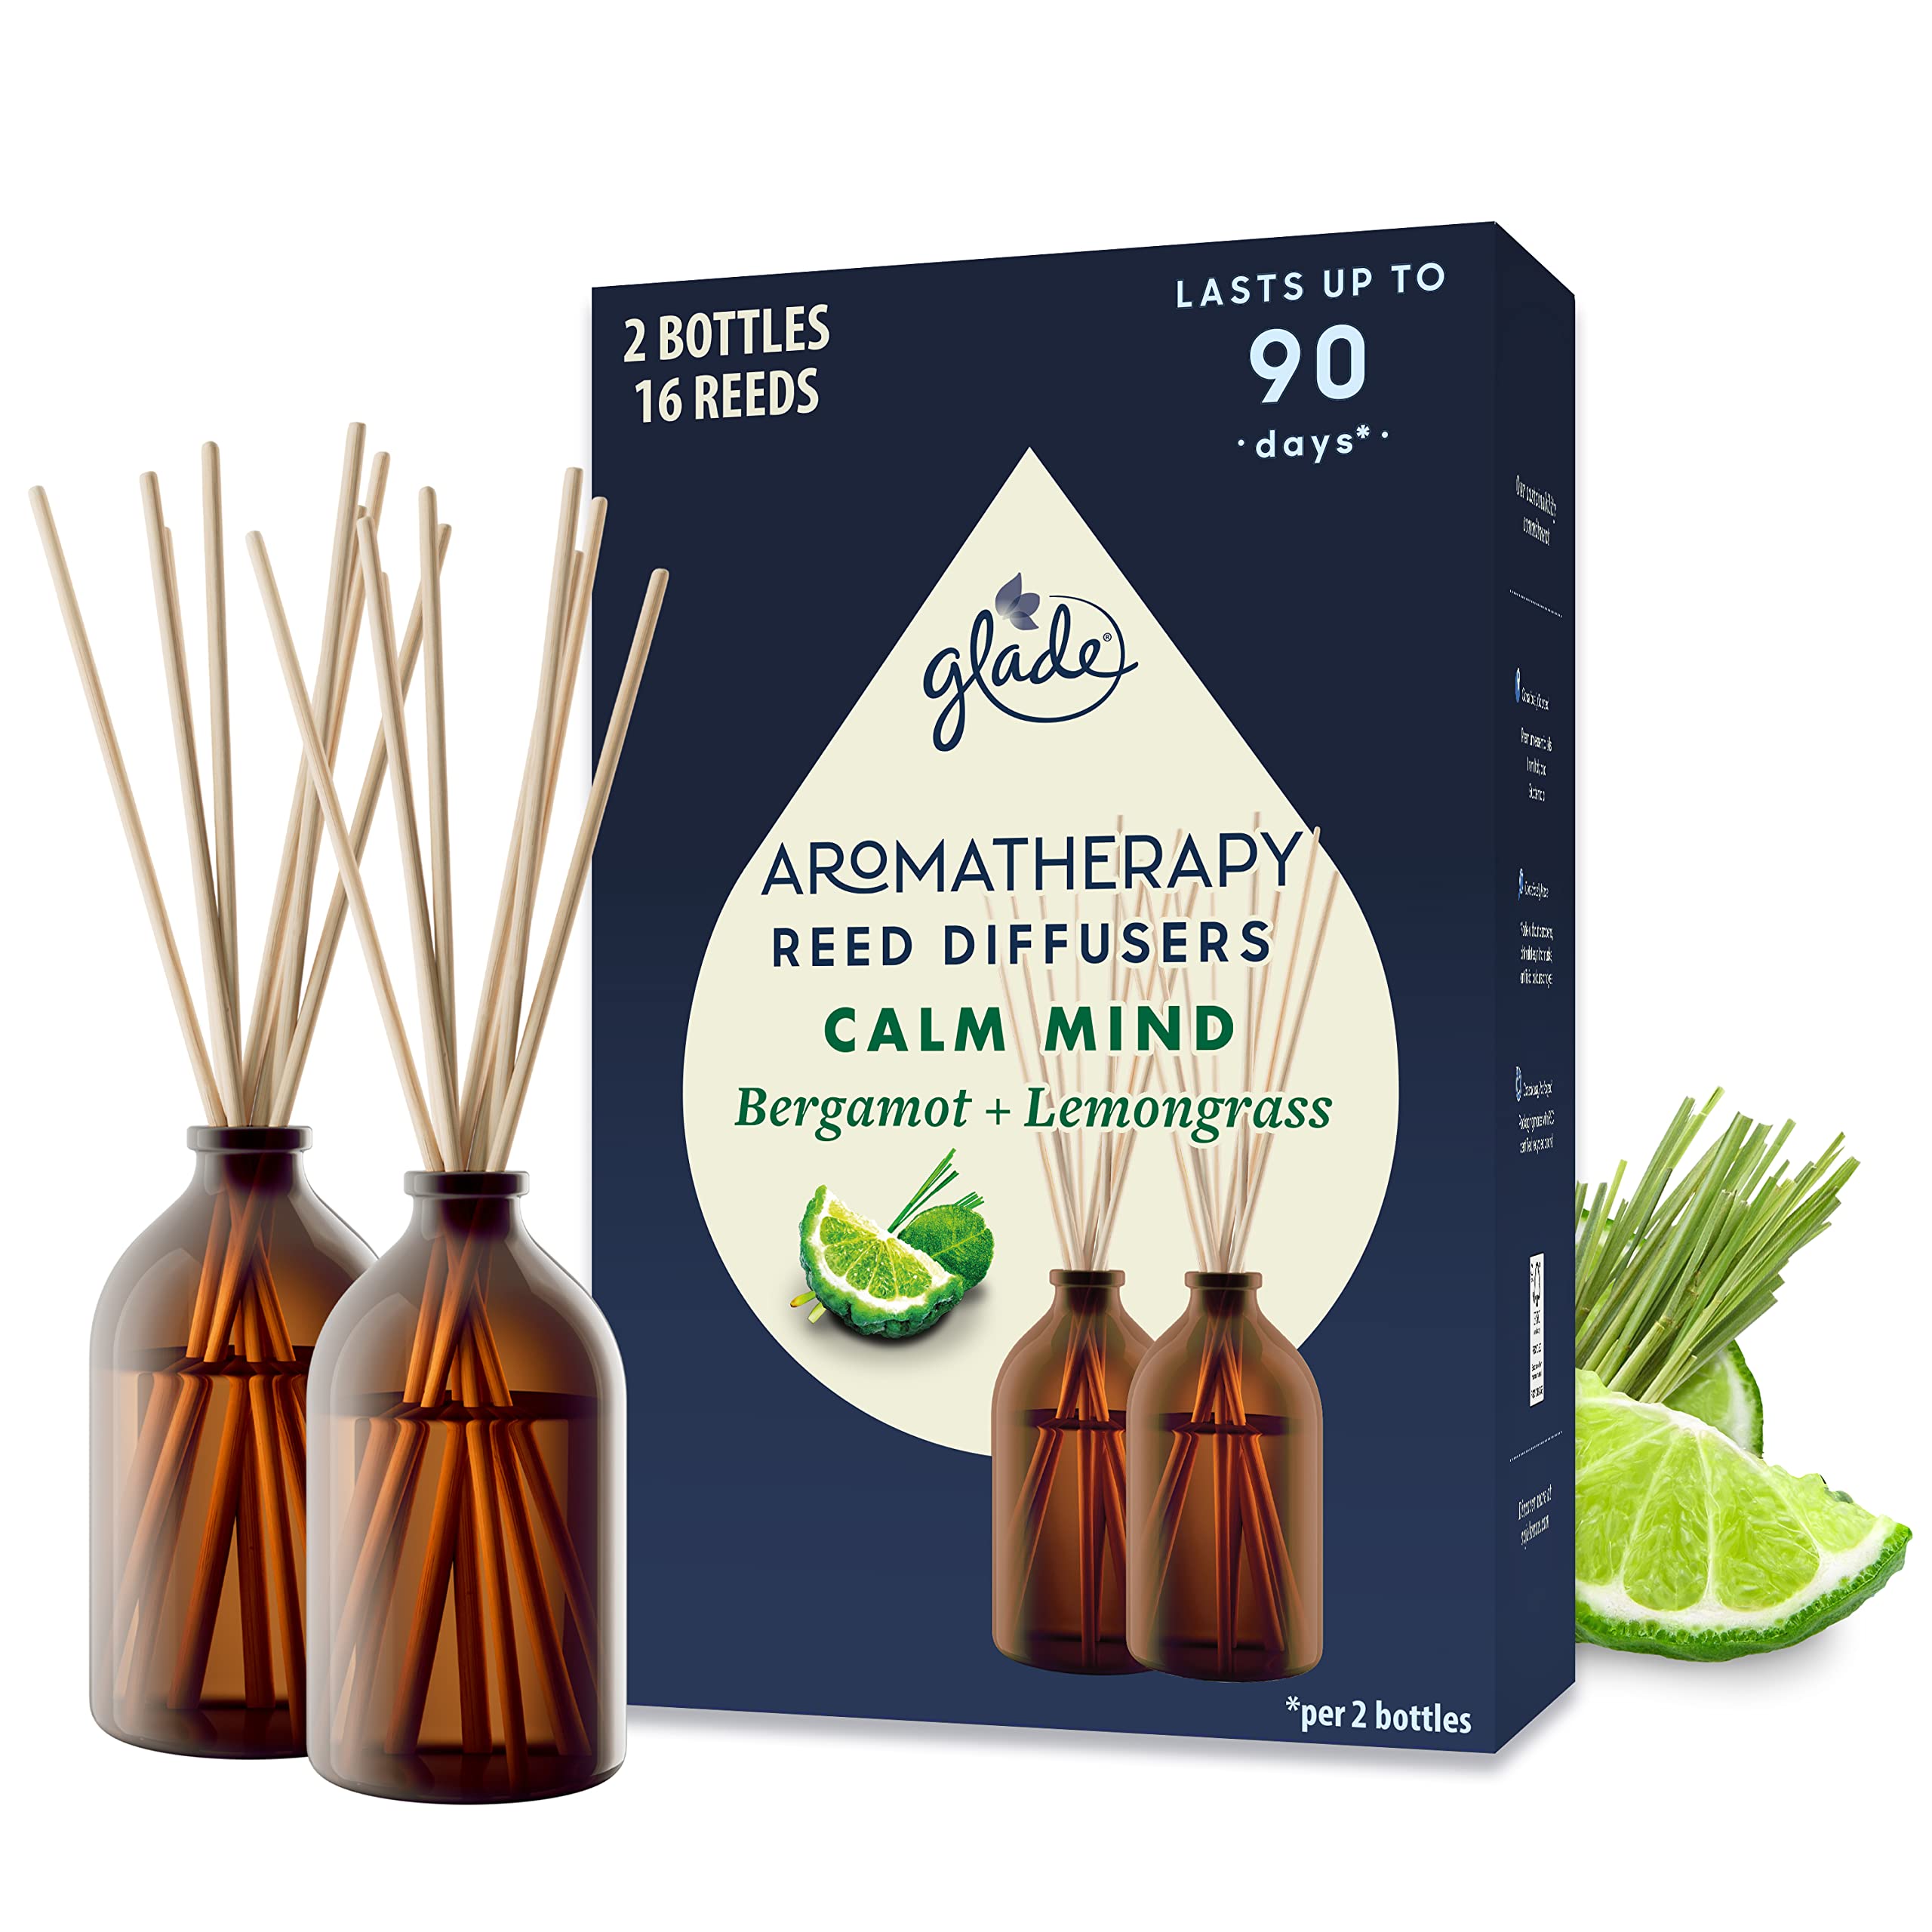 Buy Glade Aromatherapy Reed Diffuser T Set Home Décor Essential Oils Diffuser Soothing 8226